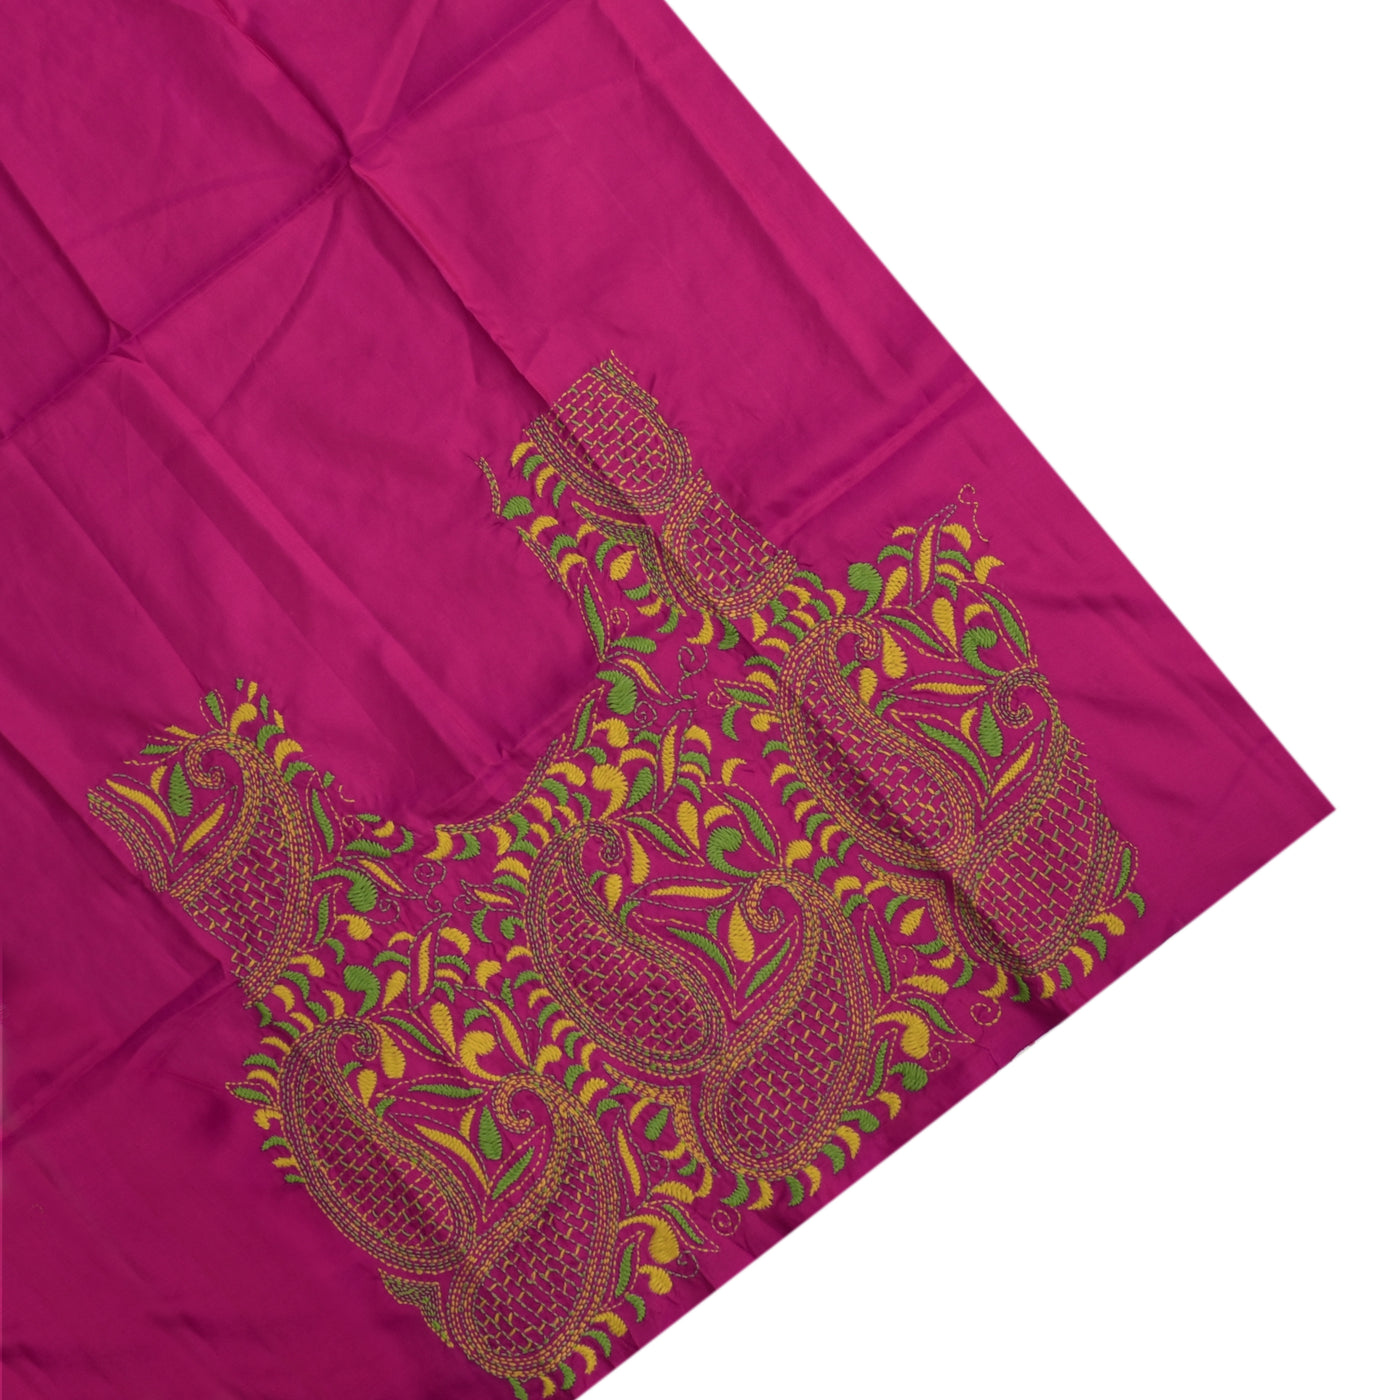 Off White Kanchi Silk Saree with Rani Pink Embroidery Blouse